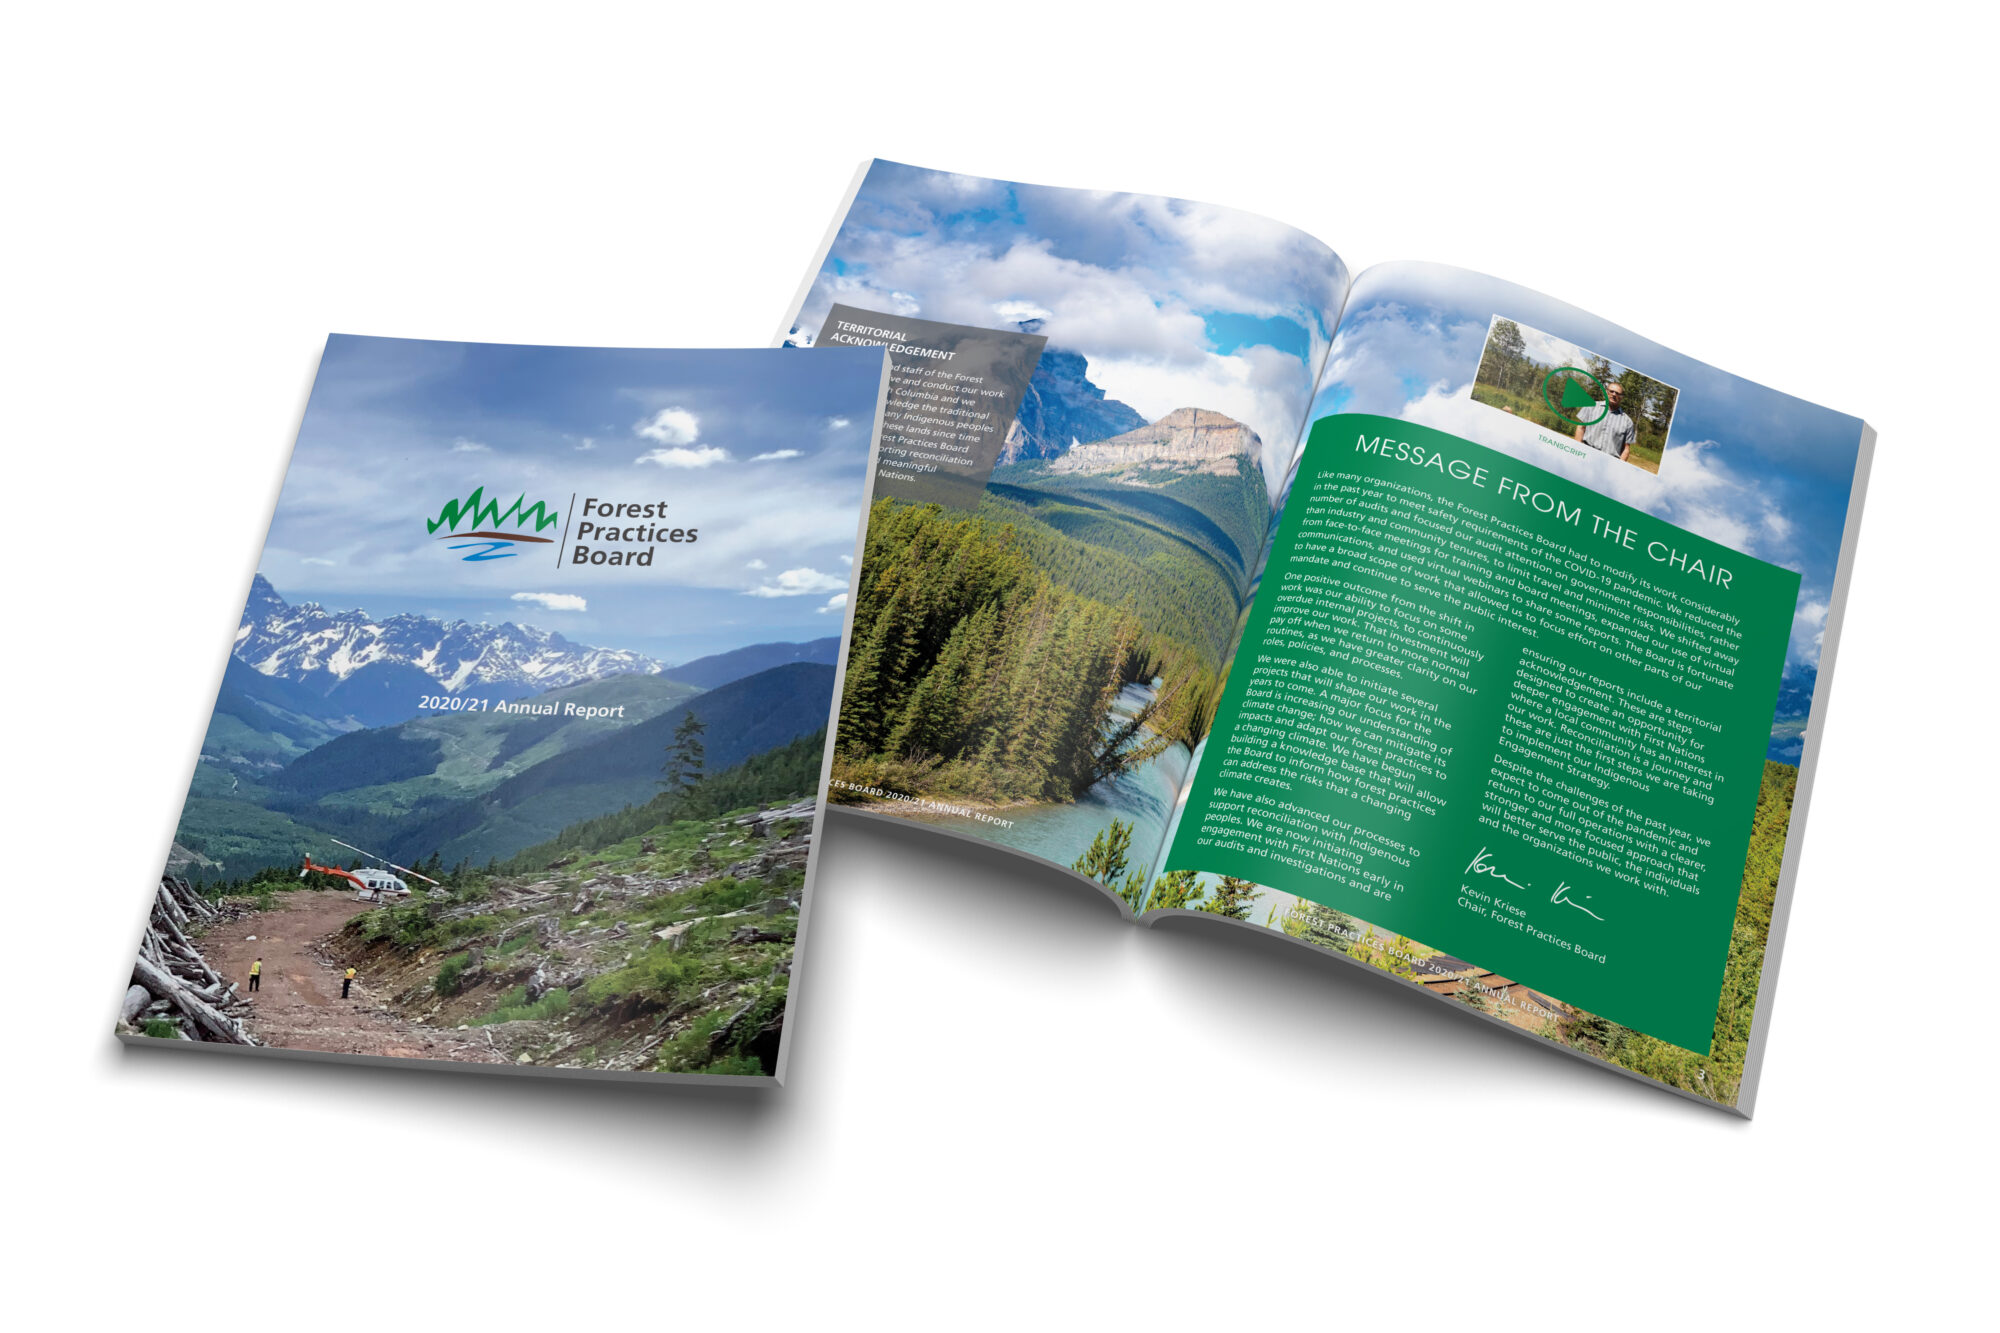 Forest Practices Board - 2020/21 Annual Report